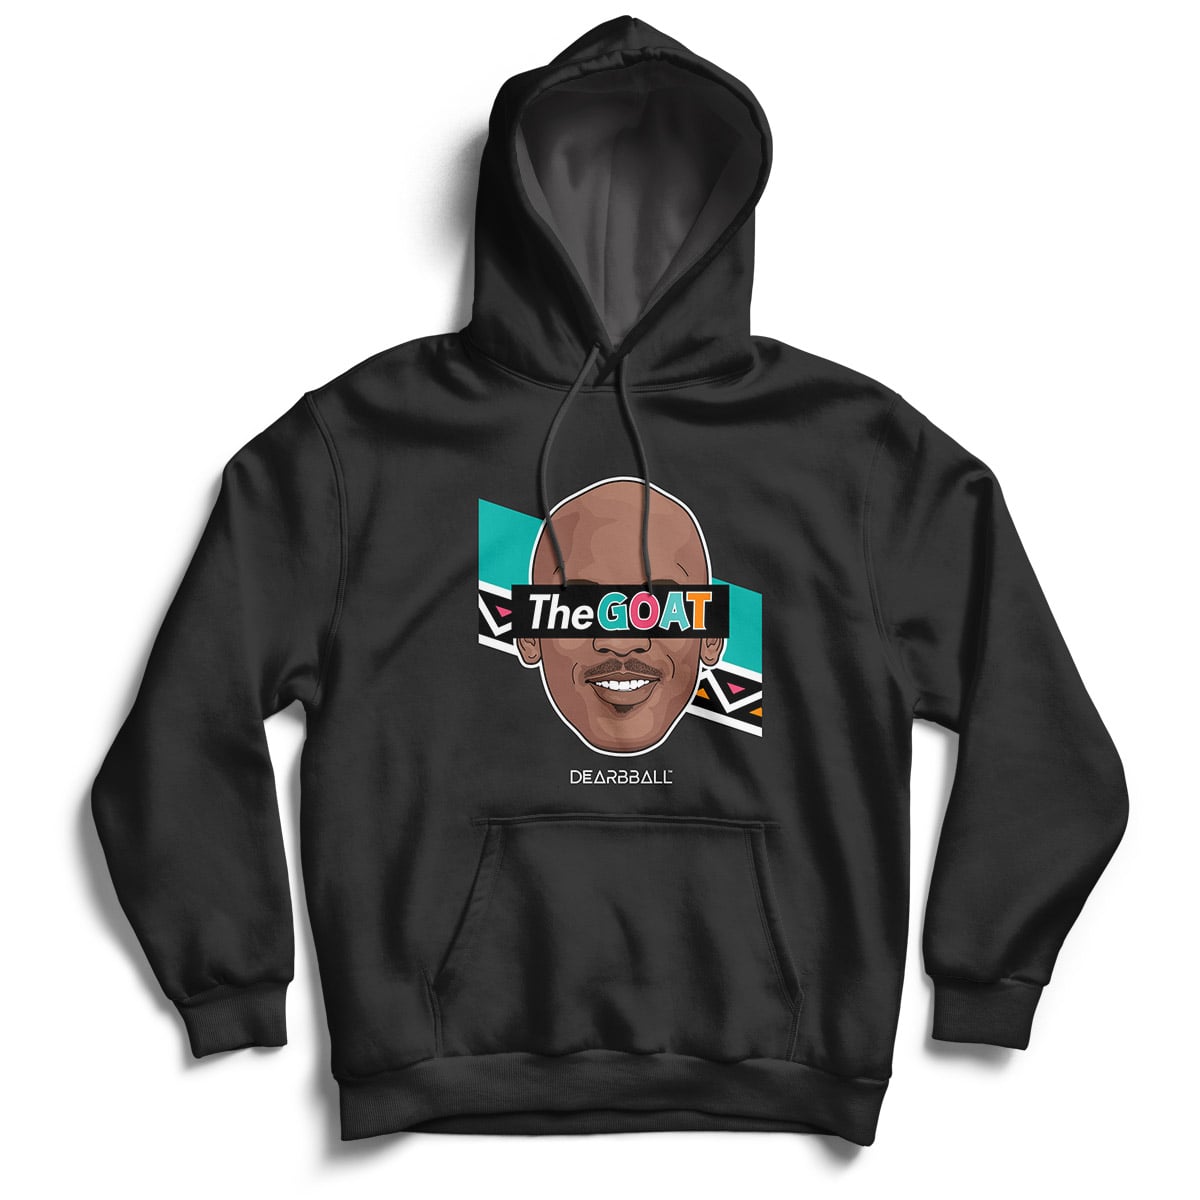 DearBBall Hooded Sweatshirt - TheGOAT 1996 All Star Game Edition